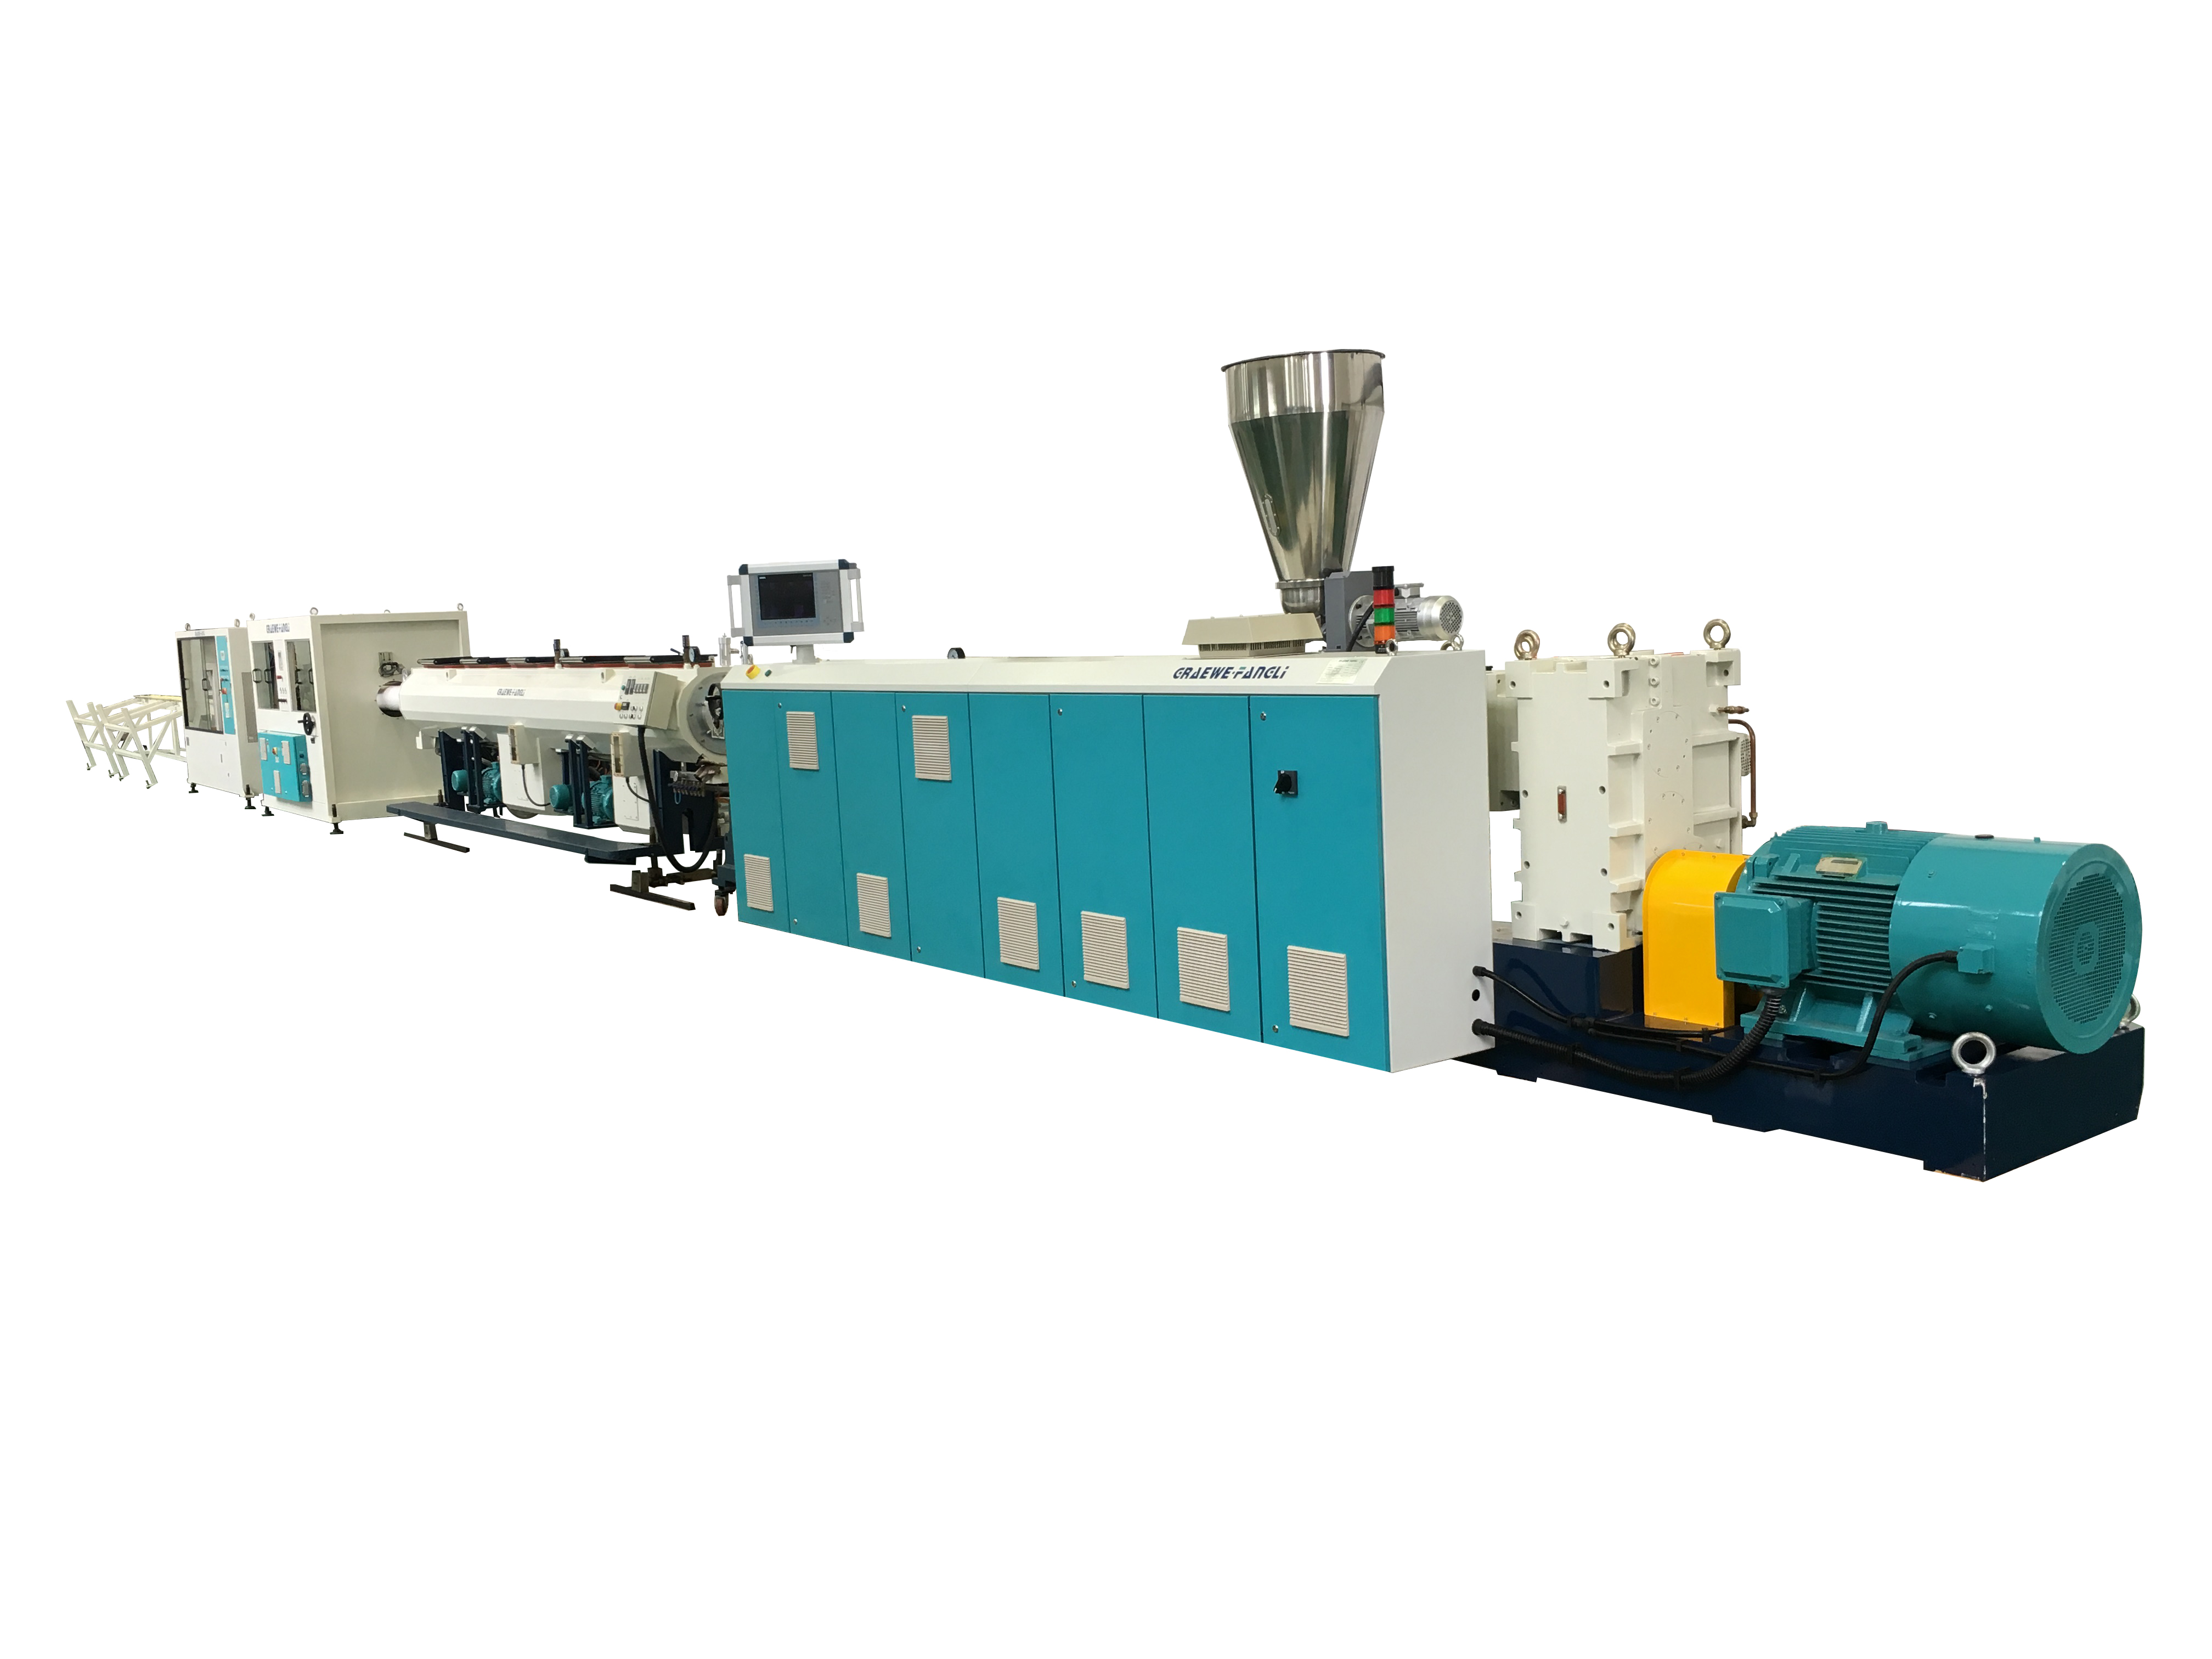 Notes for Production Operation of Twin Screw Extruder